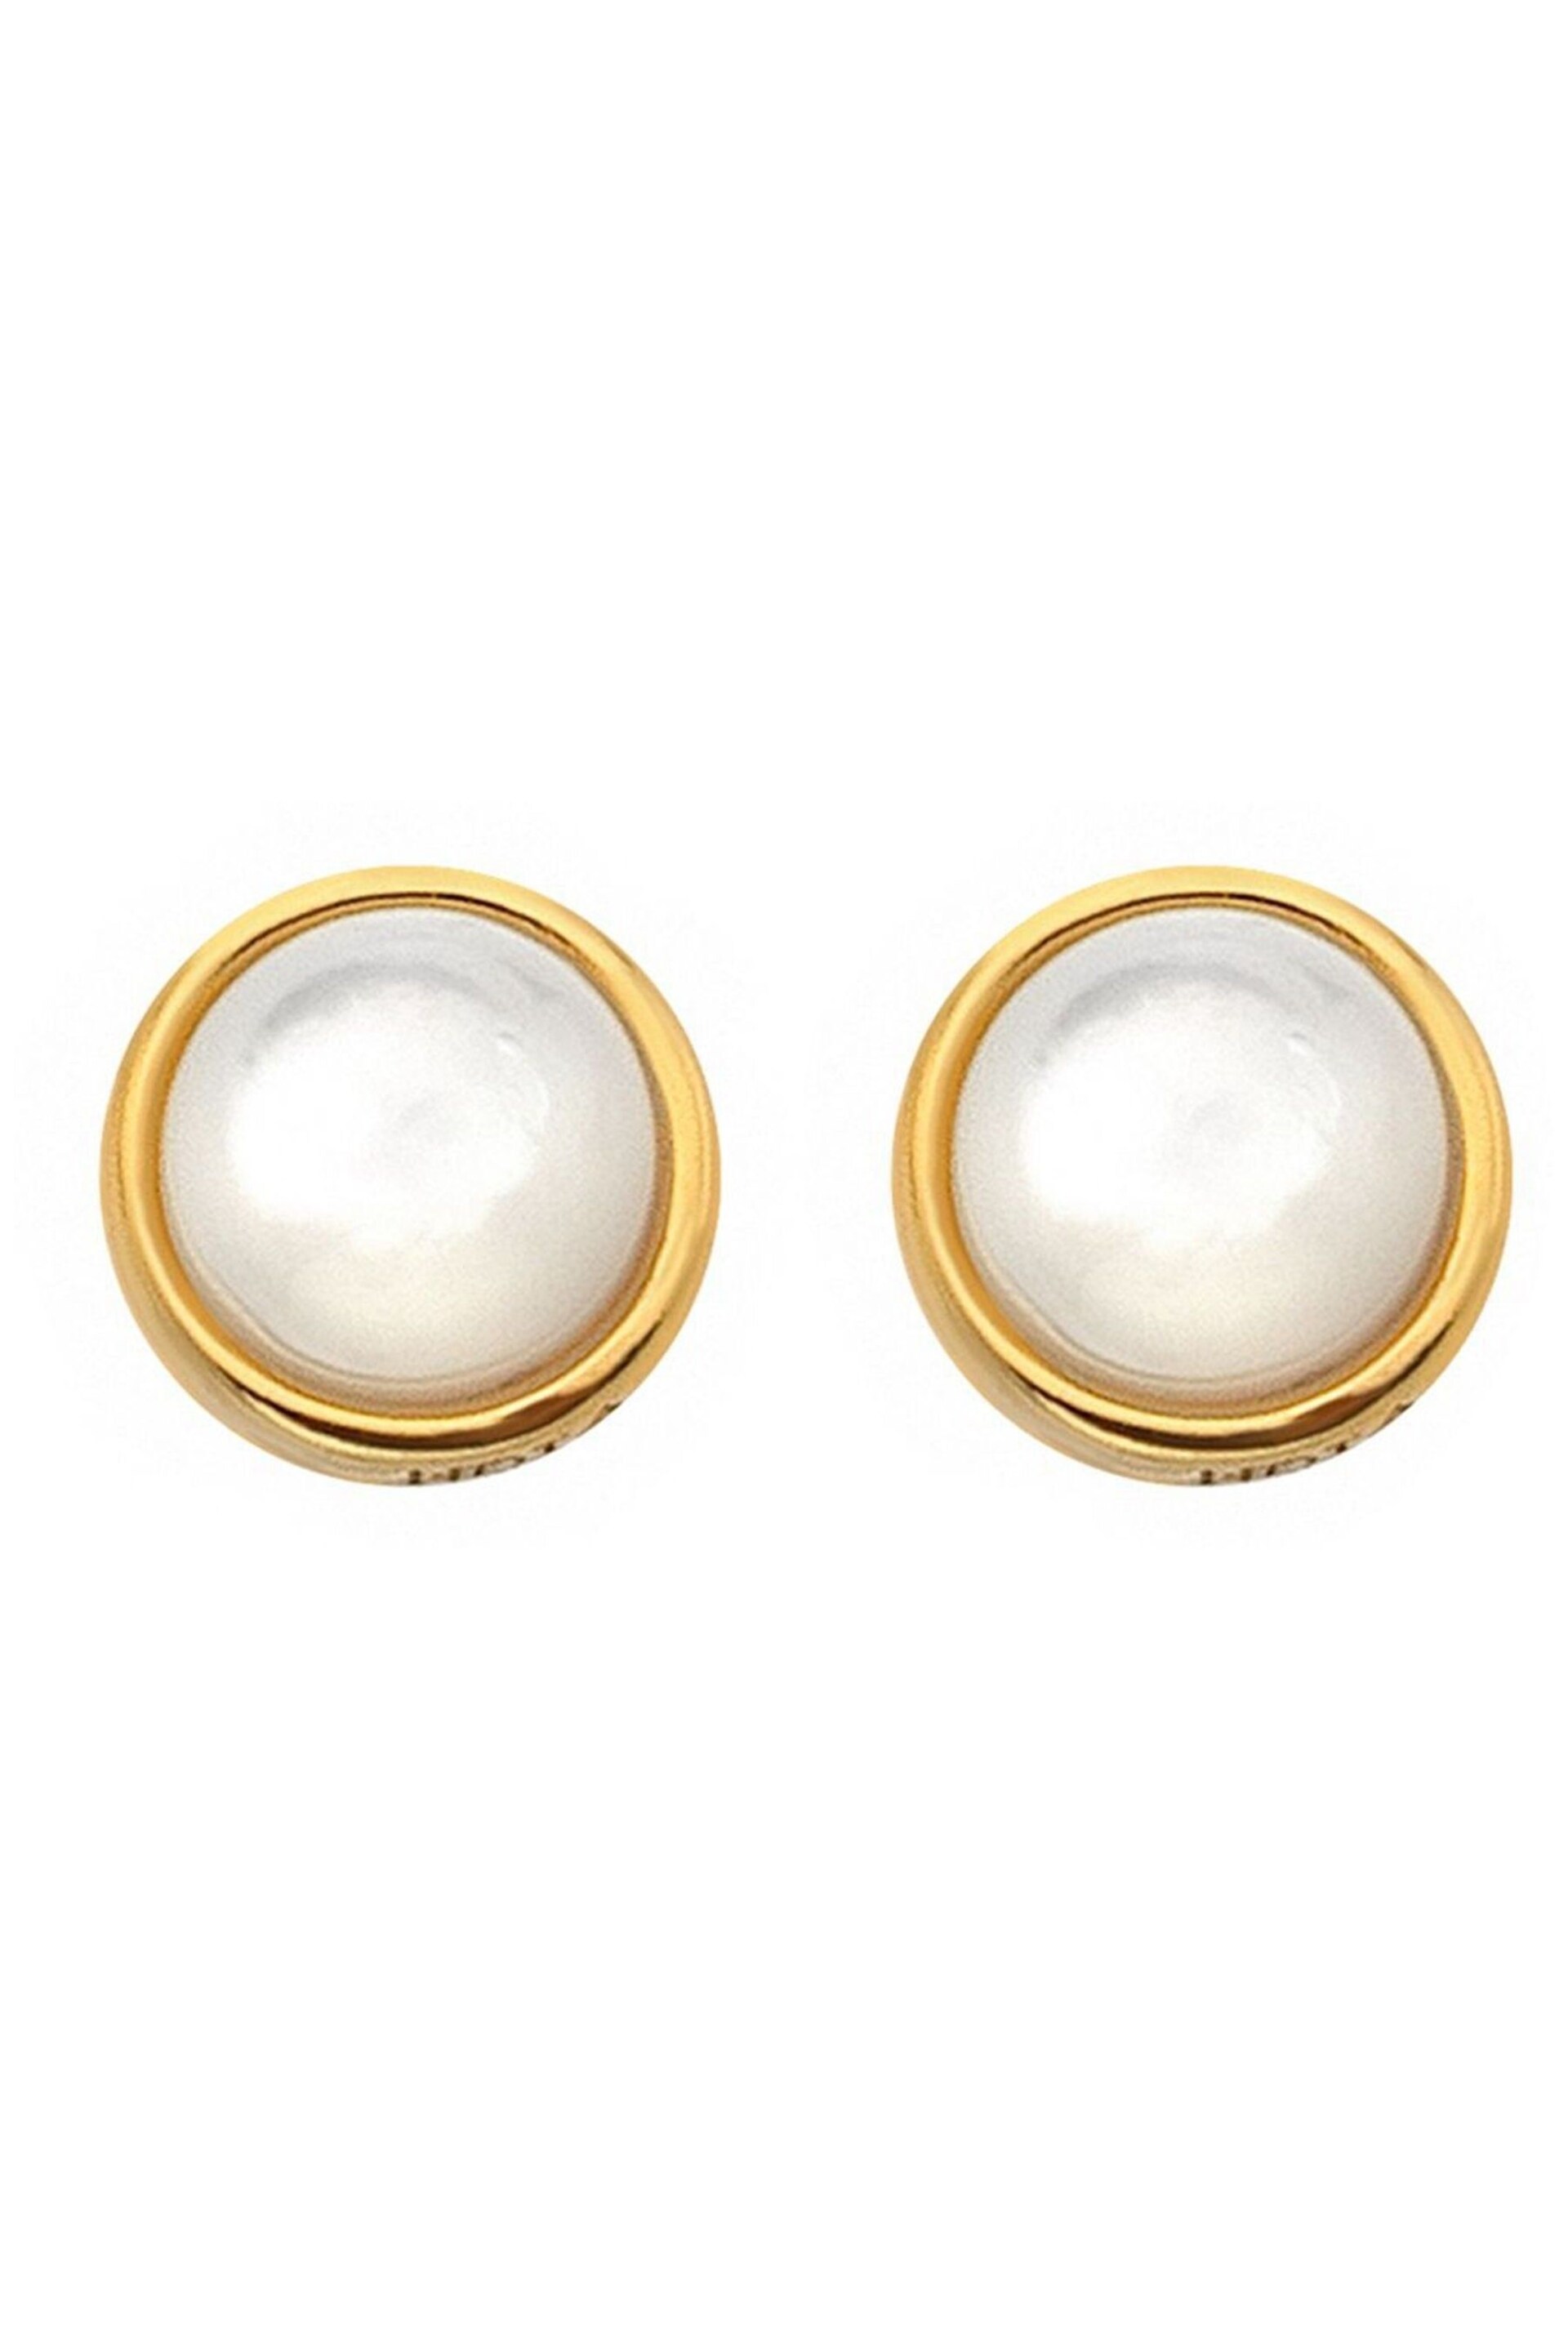 Hot Diamonds X JJ Gold Tone Calm Mother of Pearl Stud Earrings - Image 2 of 3